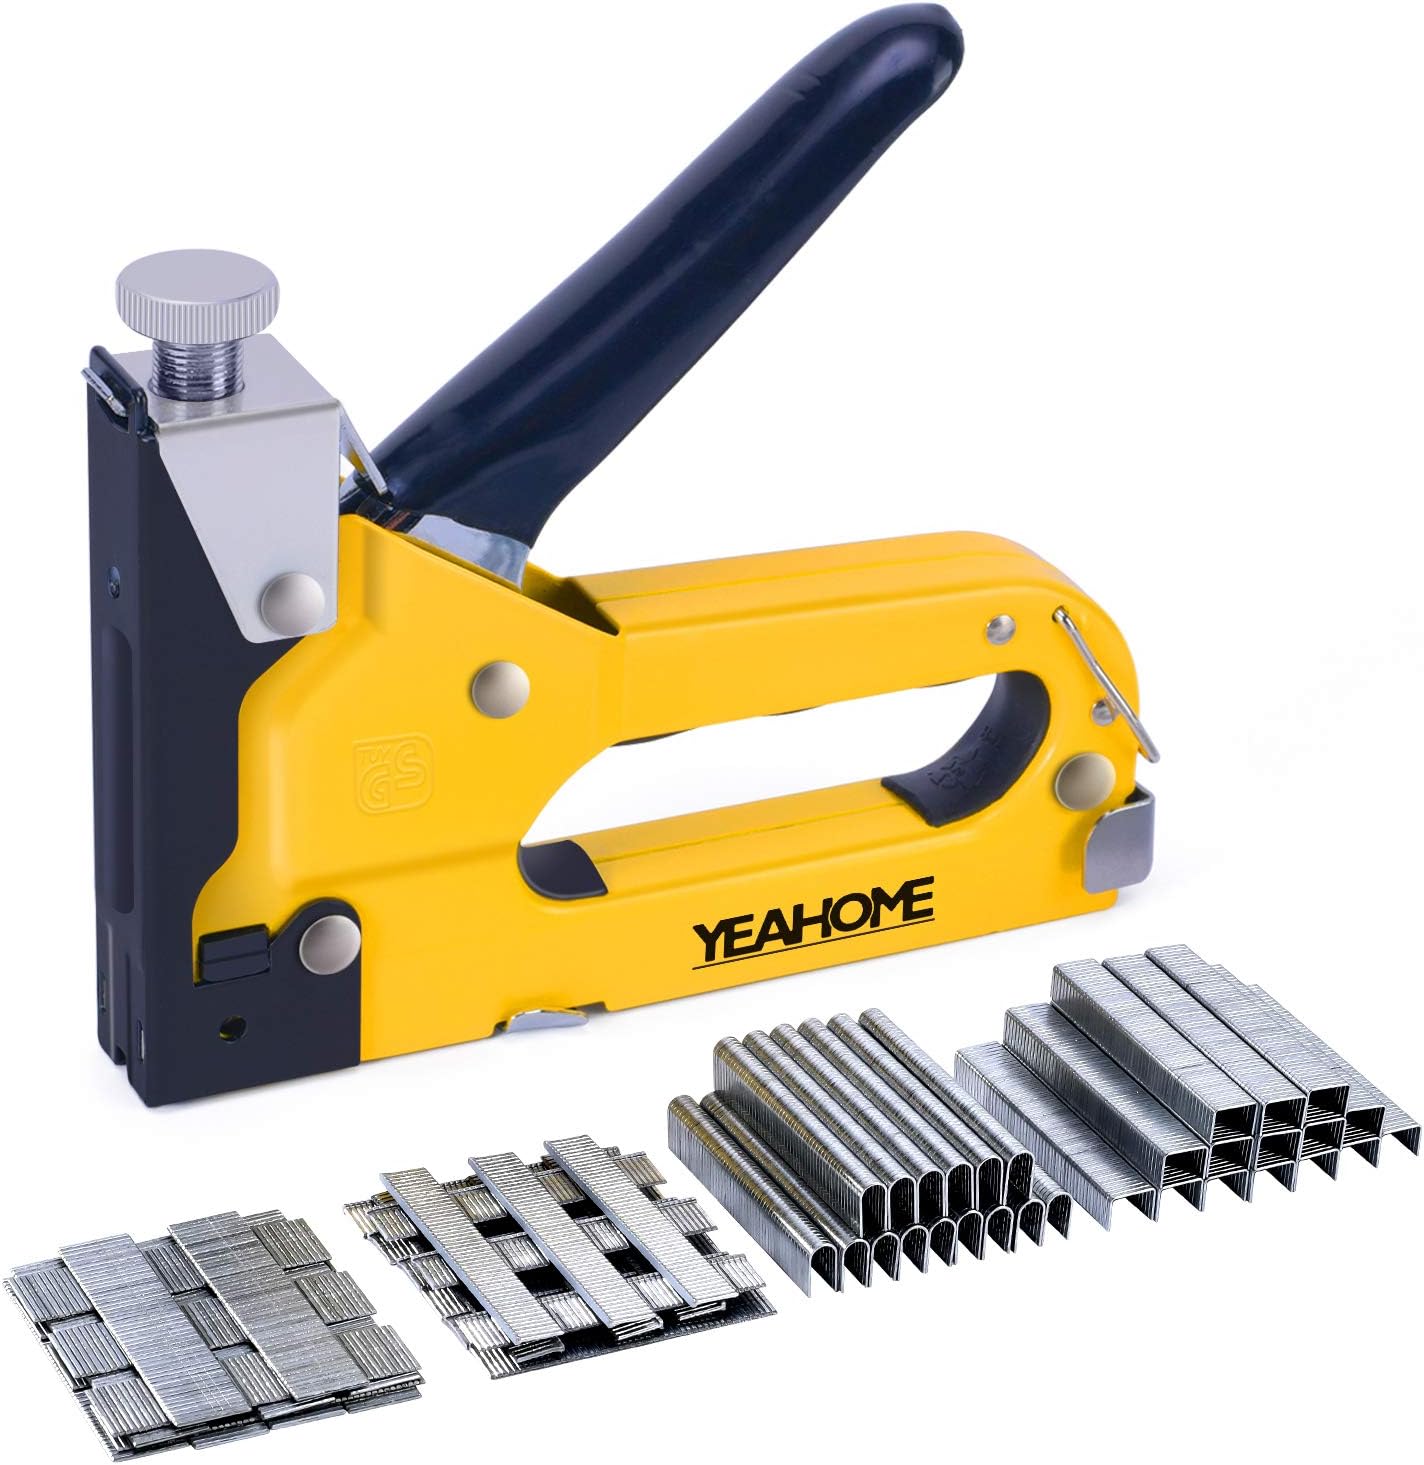 staple gun for wood detailed review